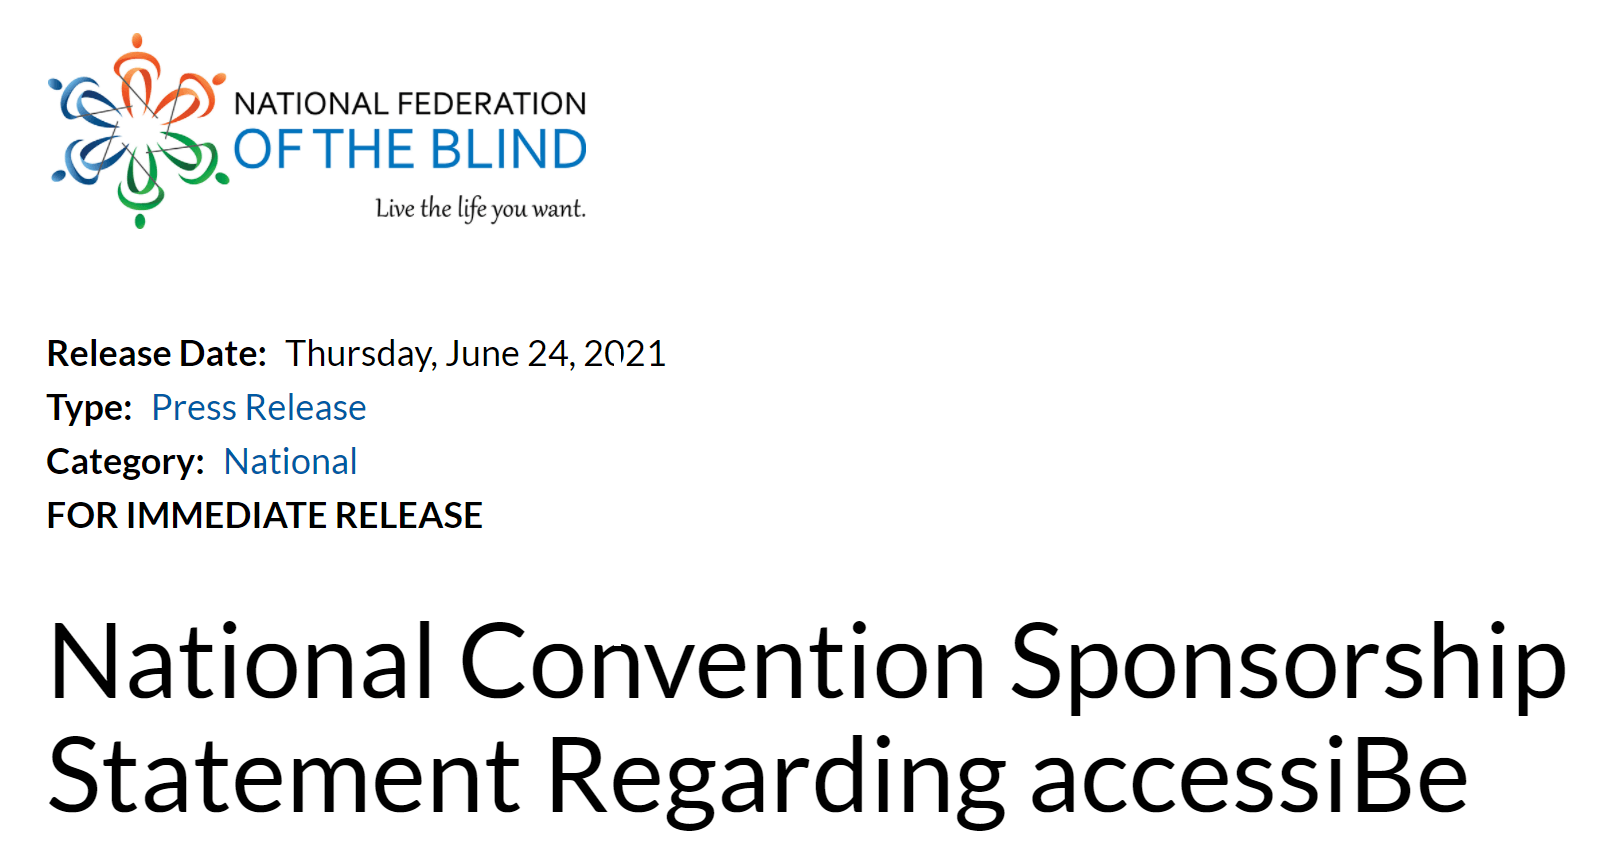 National Federation of the Blind, press release dated June 24, 2021: National Convention Sponsorship Statement Regarding accessiBe